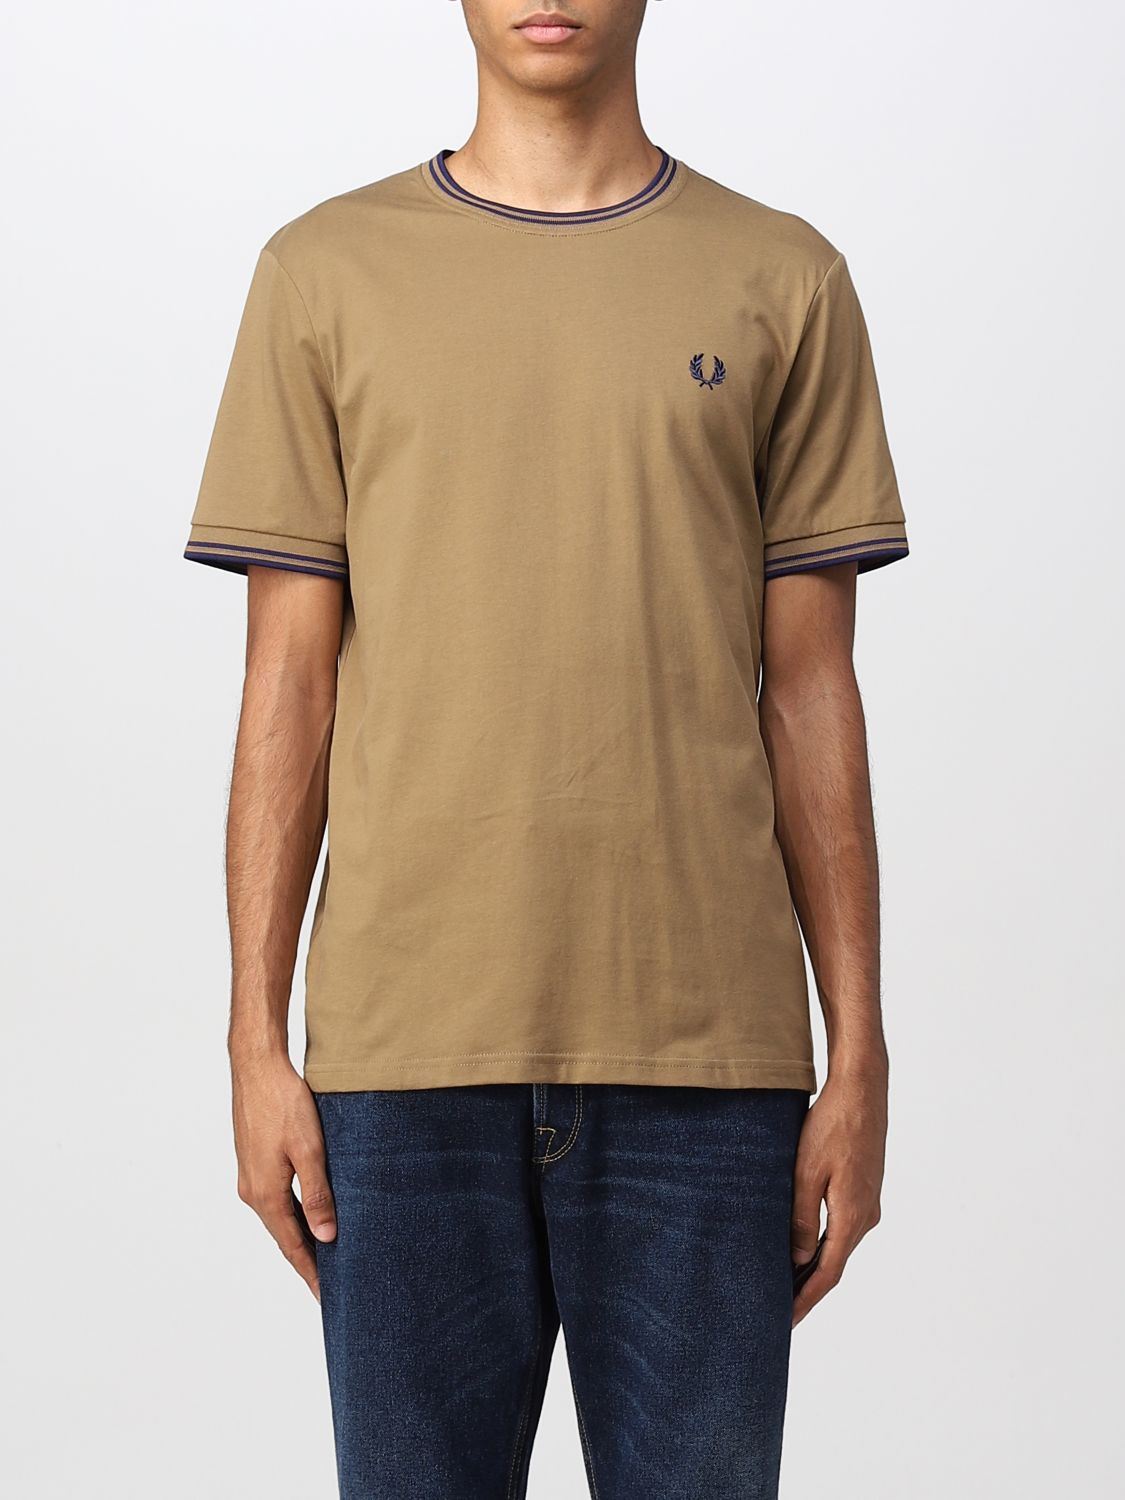 Tシャツ Fred Perry: Tシャツ Fred Perry メンズ ブラウン 1